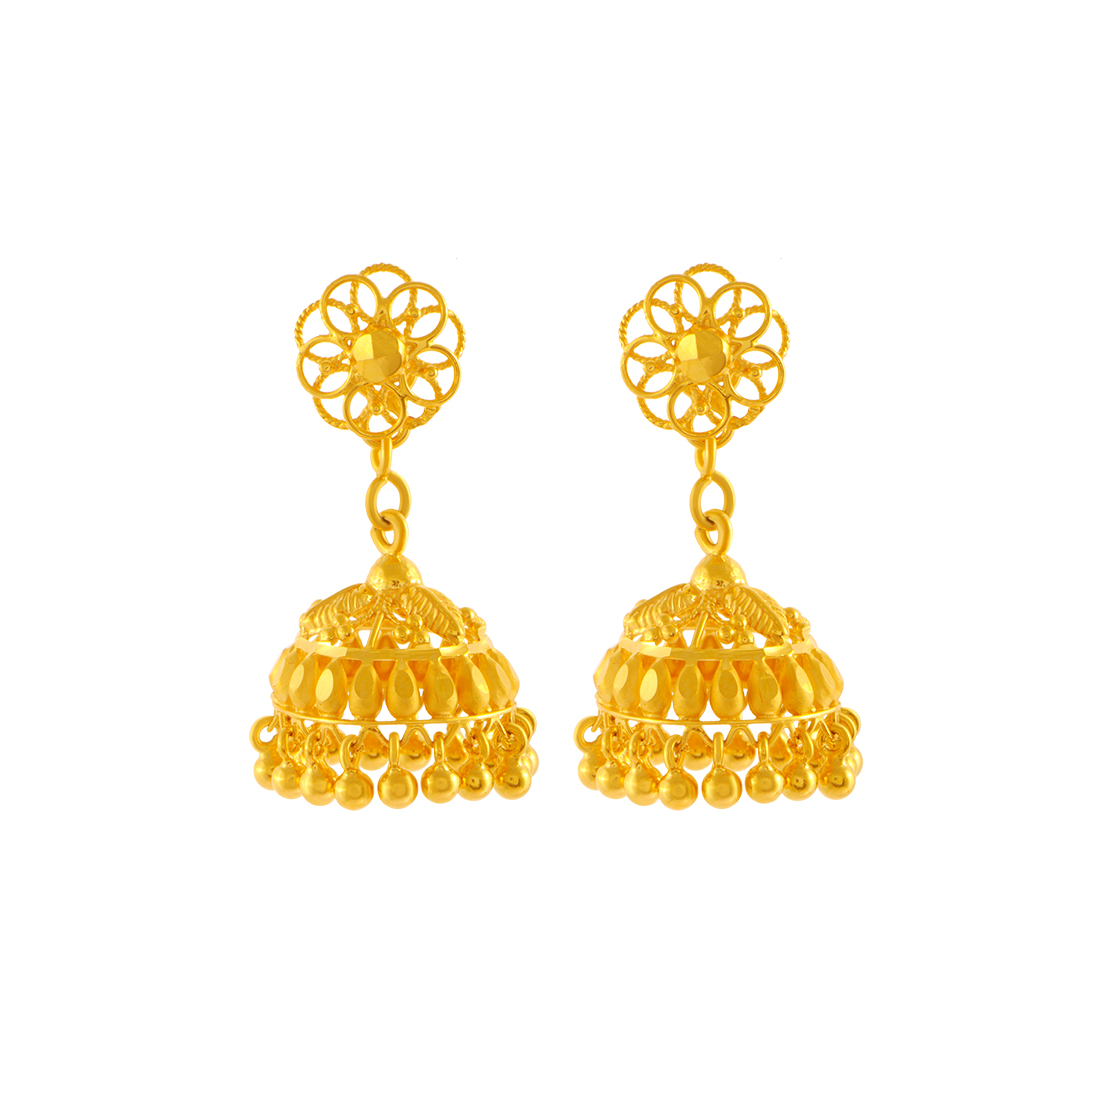 Tanishq – Shop the best gold and diamond jewellery designs from India's  favorite online jewellery store